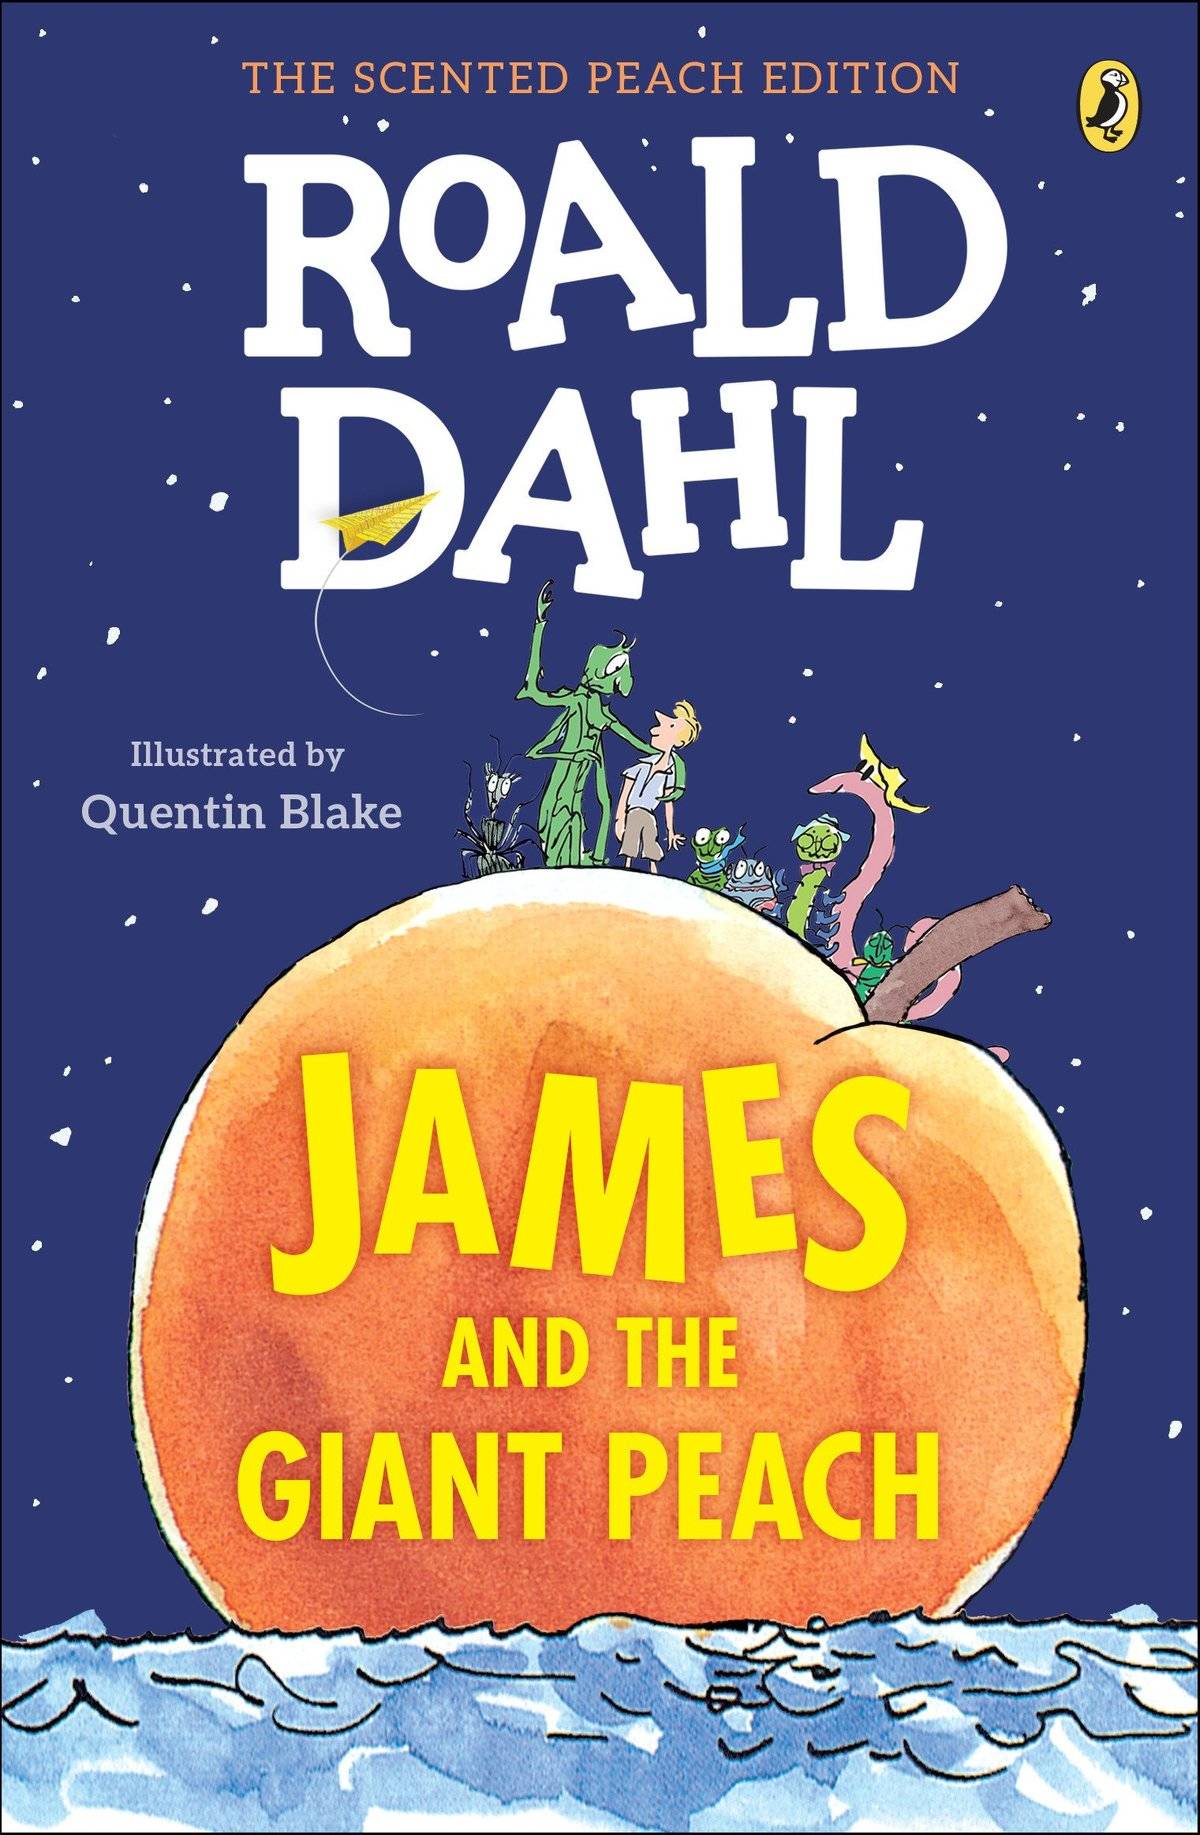 <p>Roald Dahl's beloved classic about an enchanted peach was the first of two books that he dedicated to his daughter Olivia. Unfortunately, she died one year after it was published at the age of seven.</p> <p>His story about a giant magical peach and the orphan boy who climbed inside it still captivates children everywhere, sharing Olivia's favorite story with the world. </p>